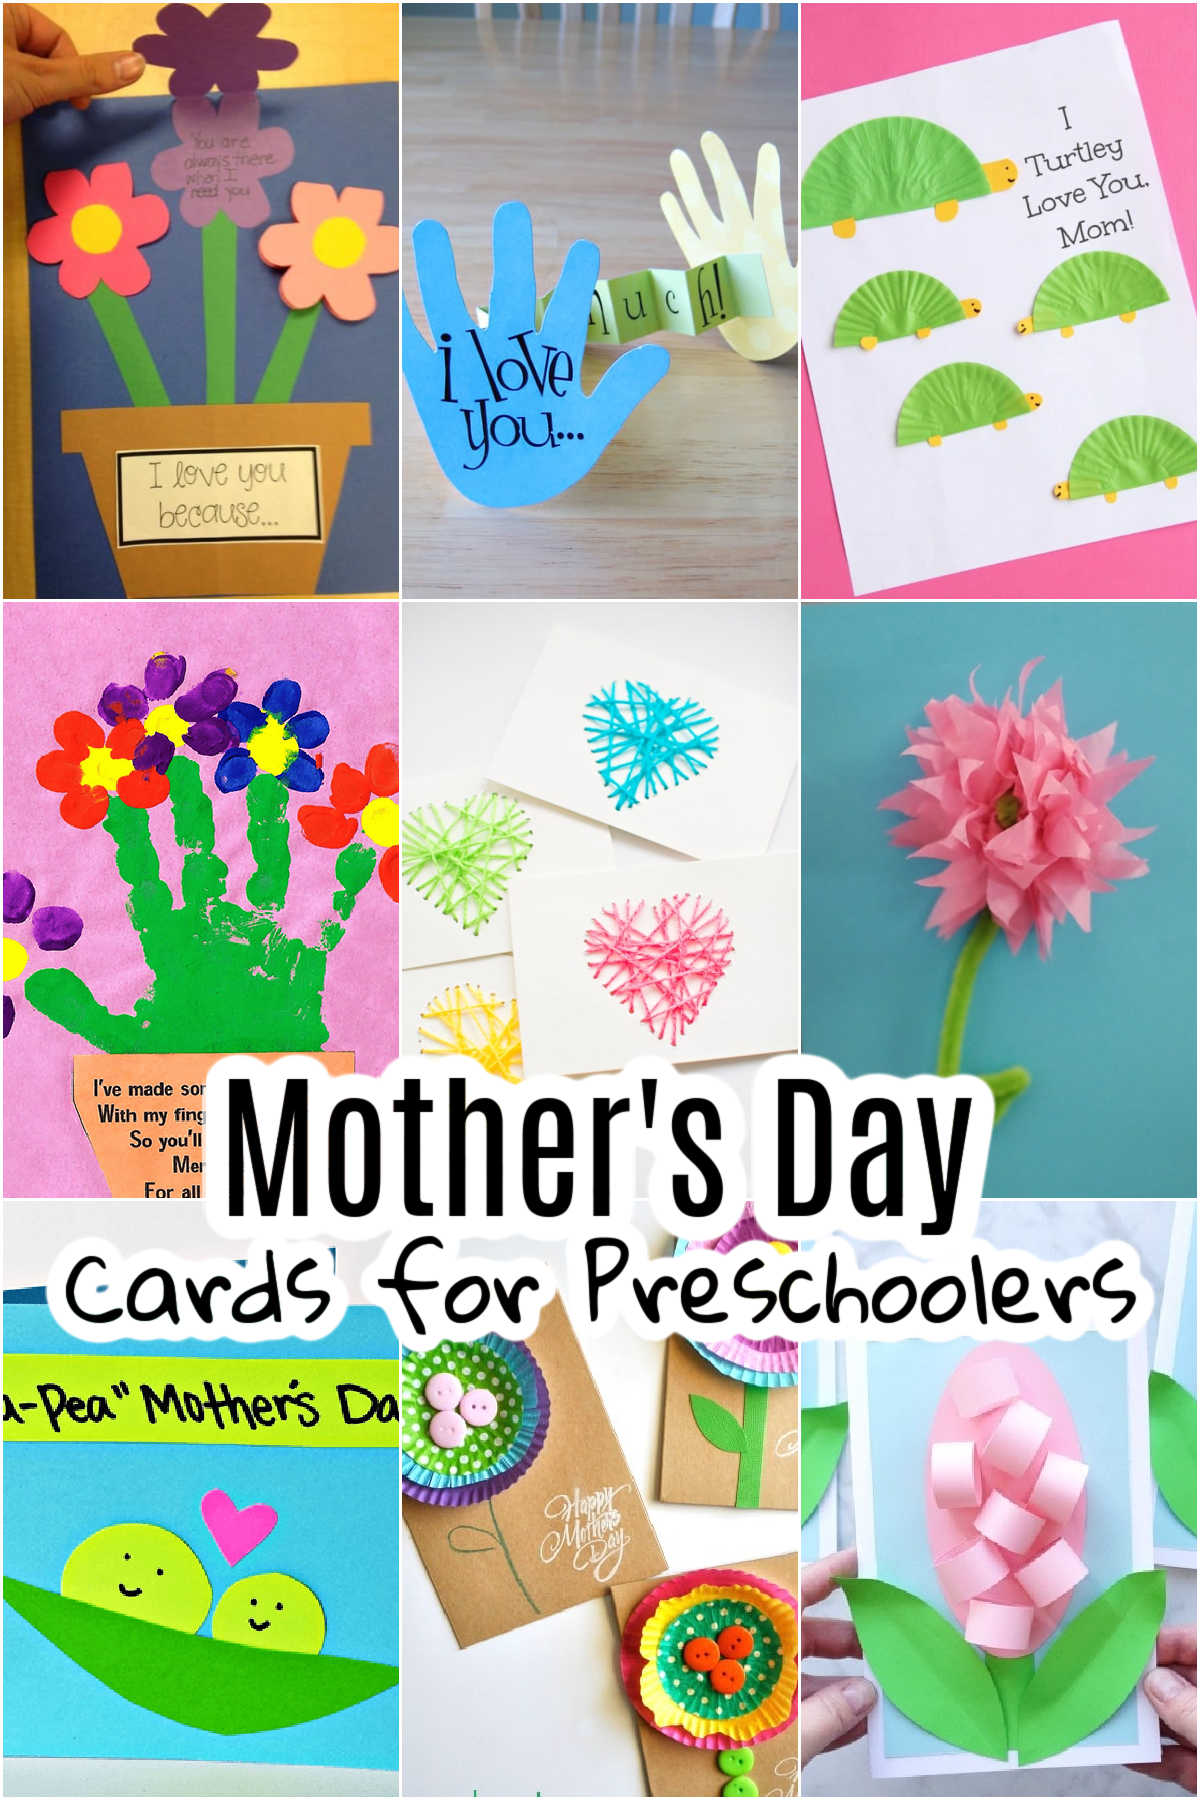 Collage of Mother's Day Cards for Preschoolers